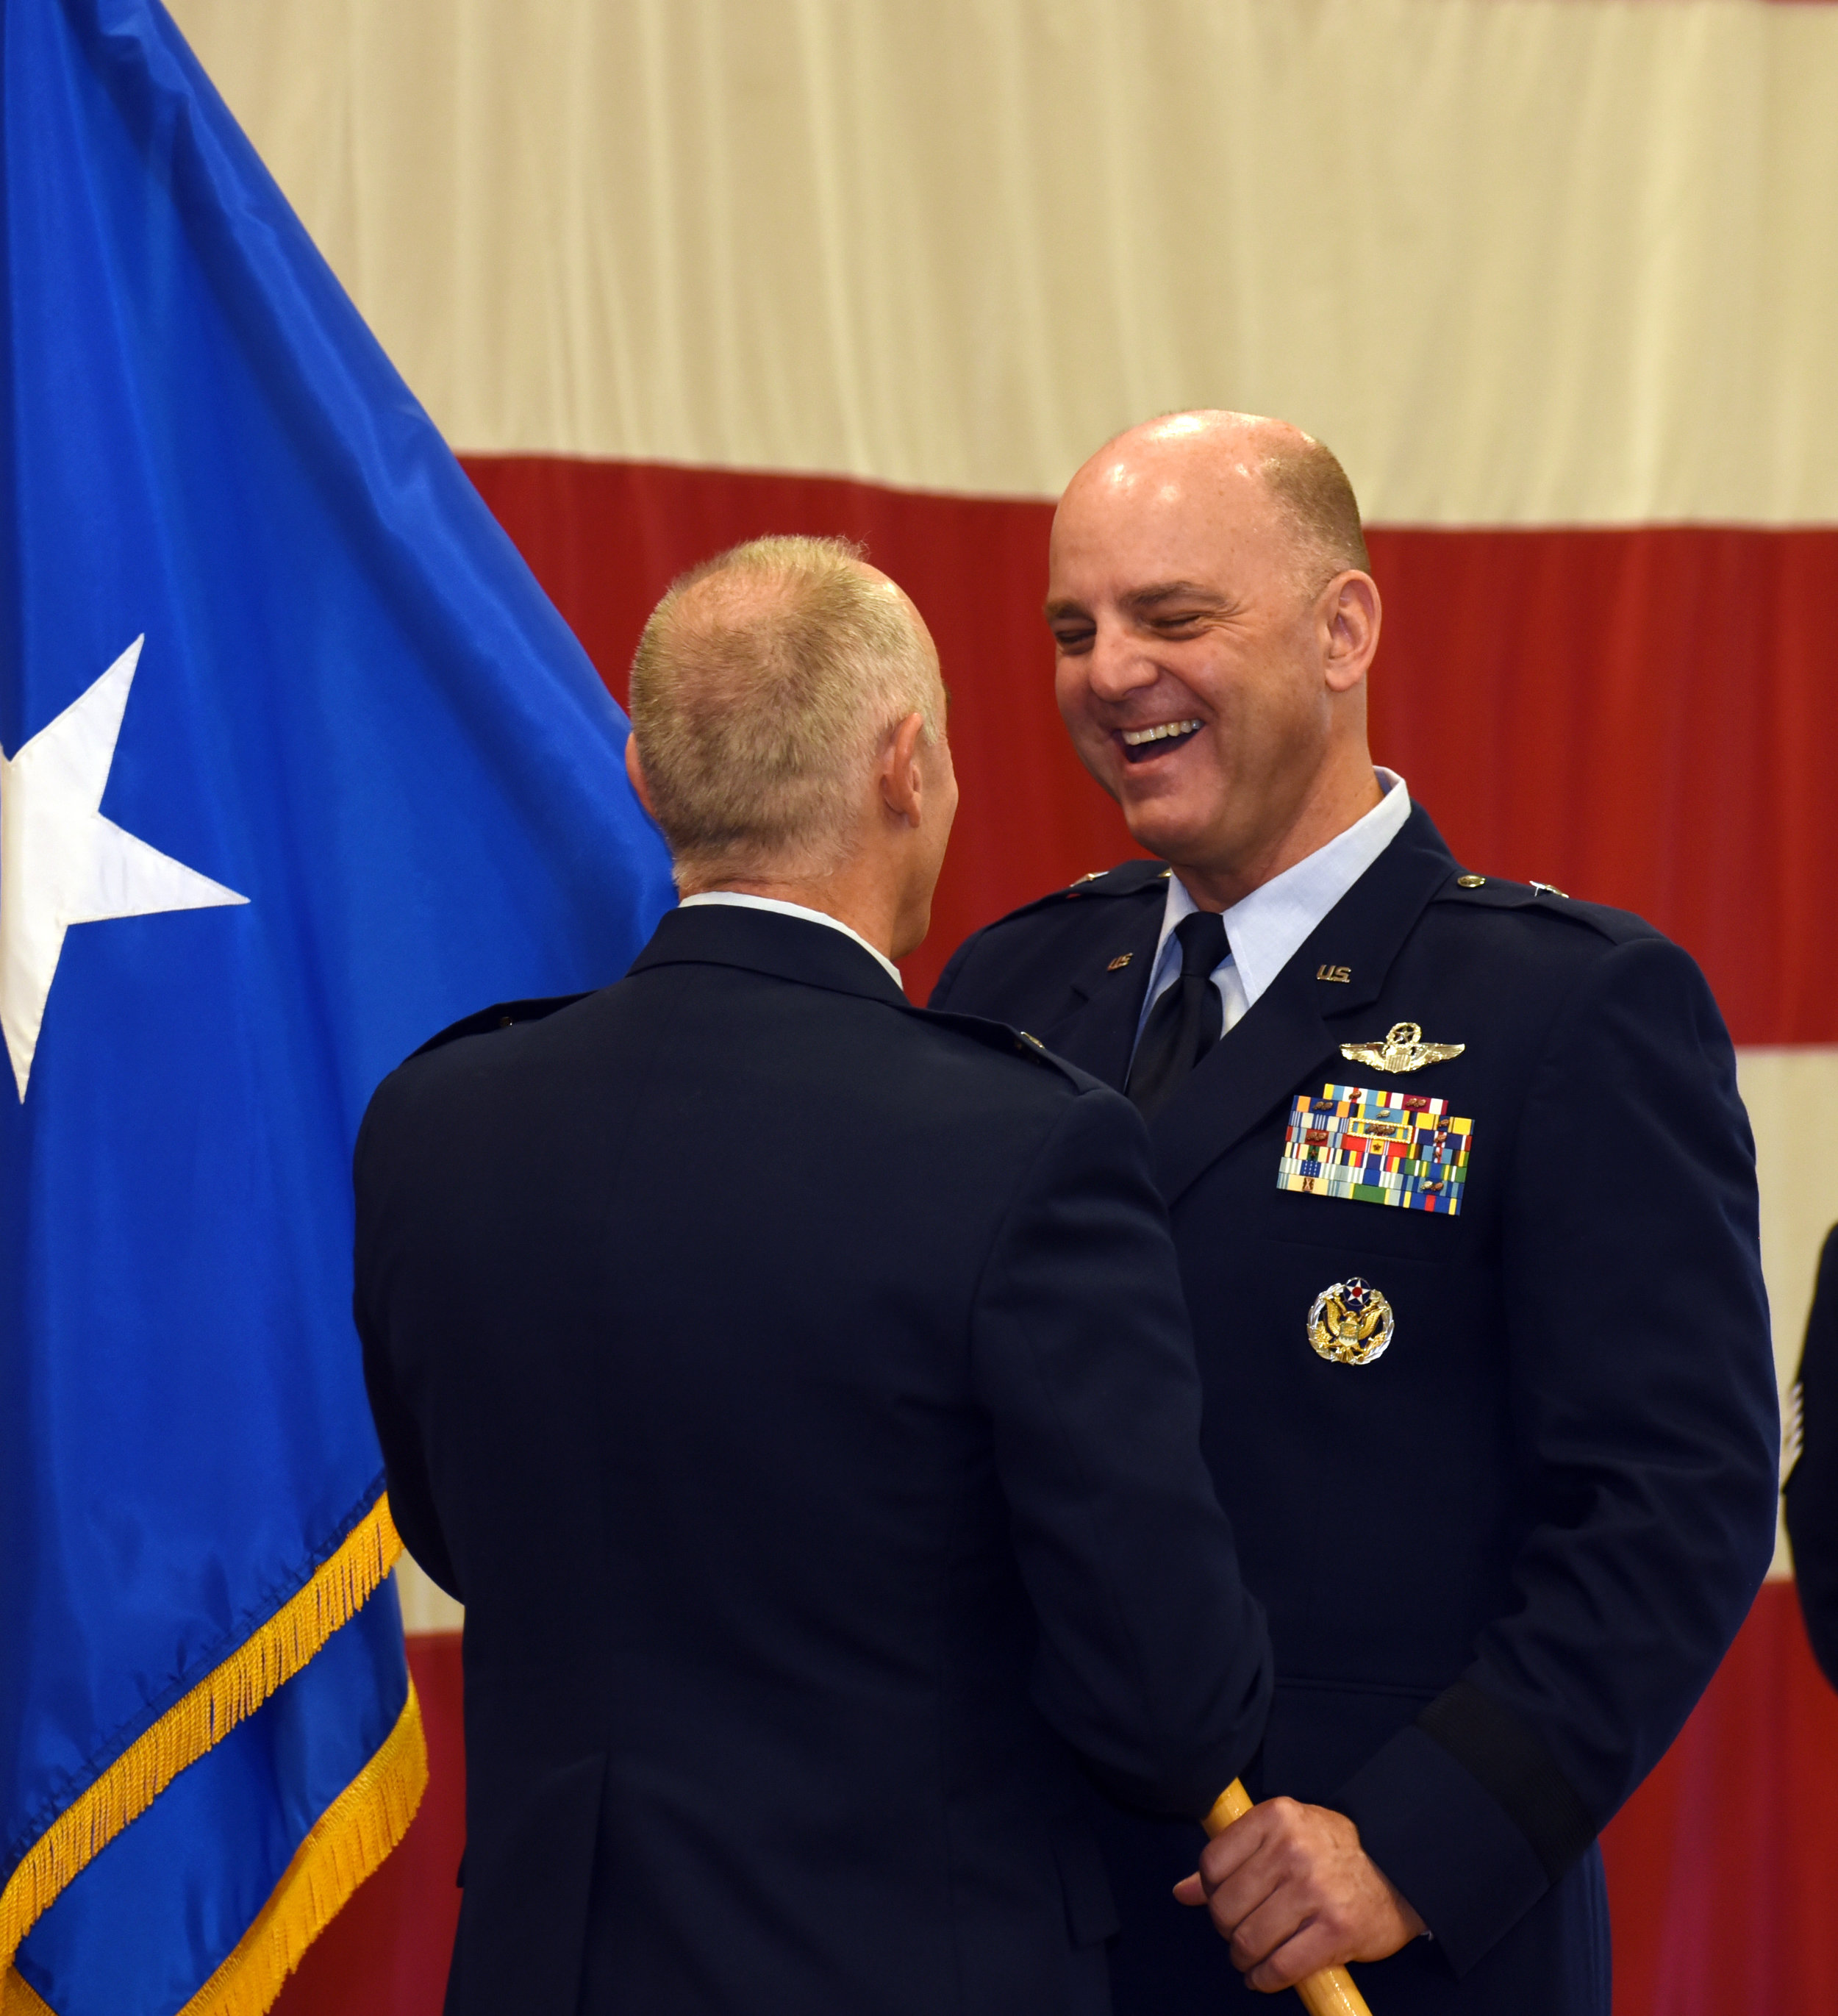  Brig. Gen. James R. Kriesel (right), incoming commander, Oregon Air National Guard, receives his one-star general officer flag from outgoing commander, Brig. Gen. Jeffrey M. Silver, during a promotion ceremony at the Anderson Readiness Center in Sal